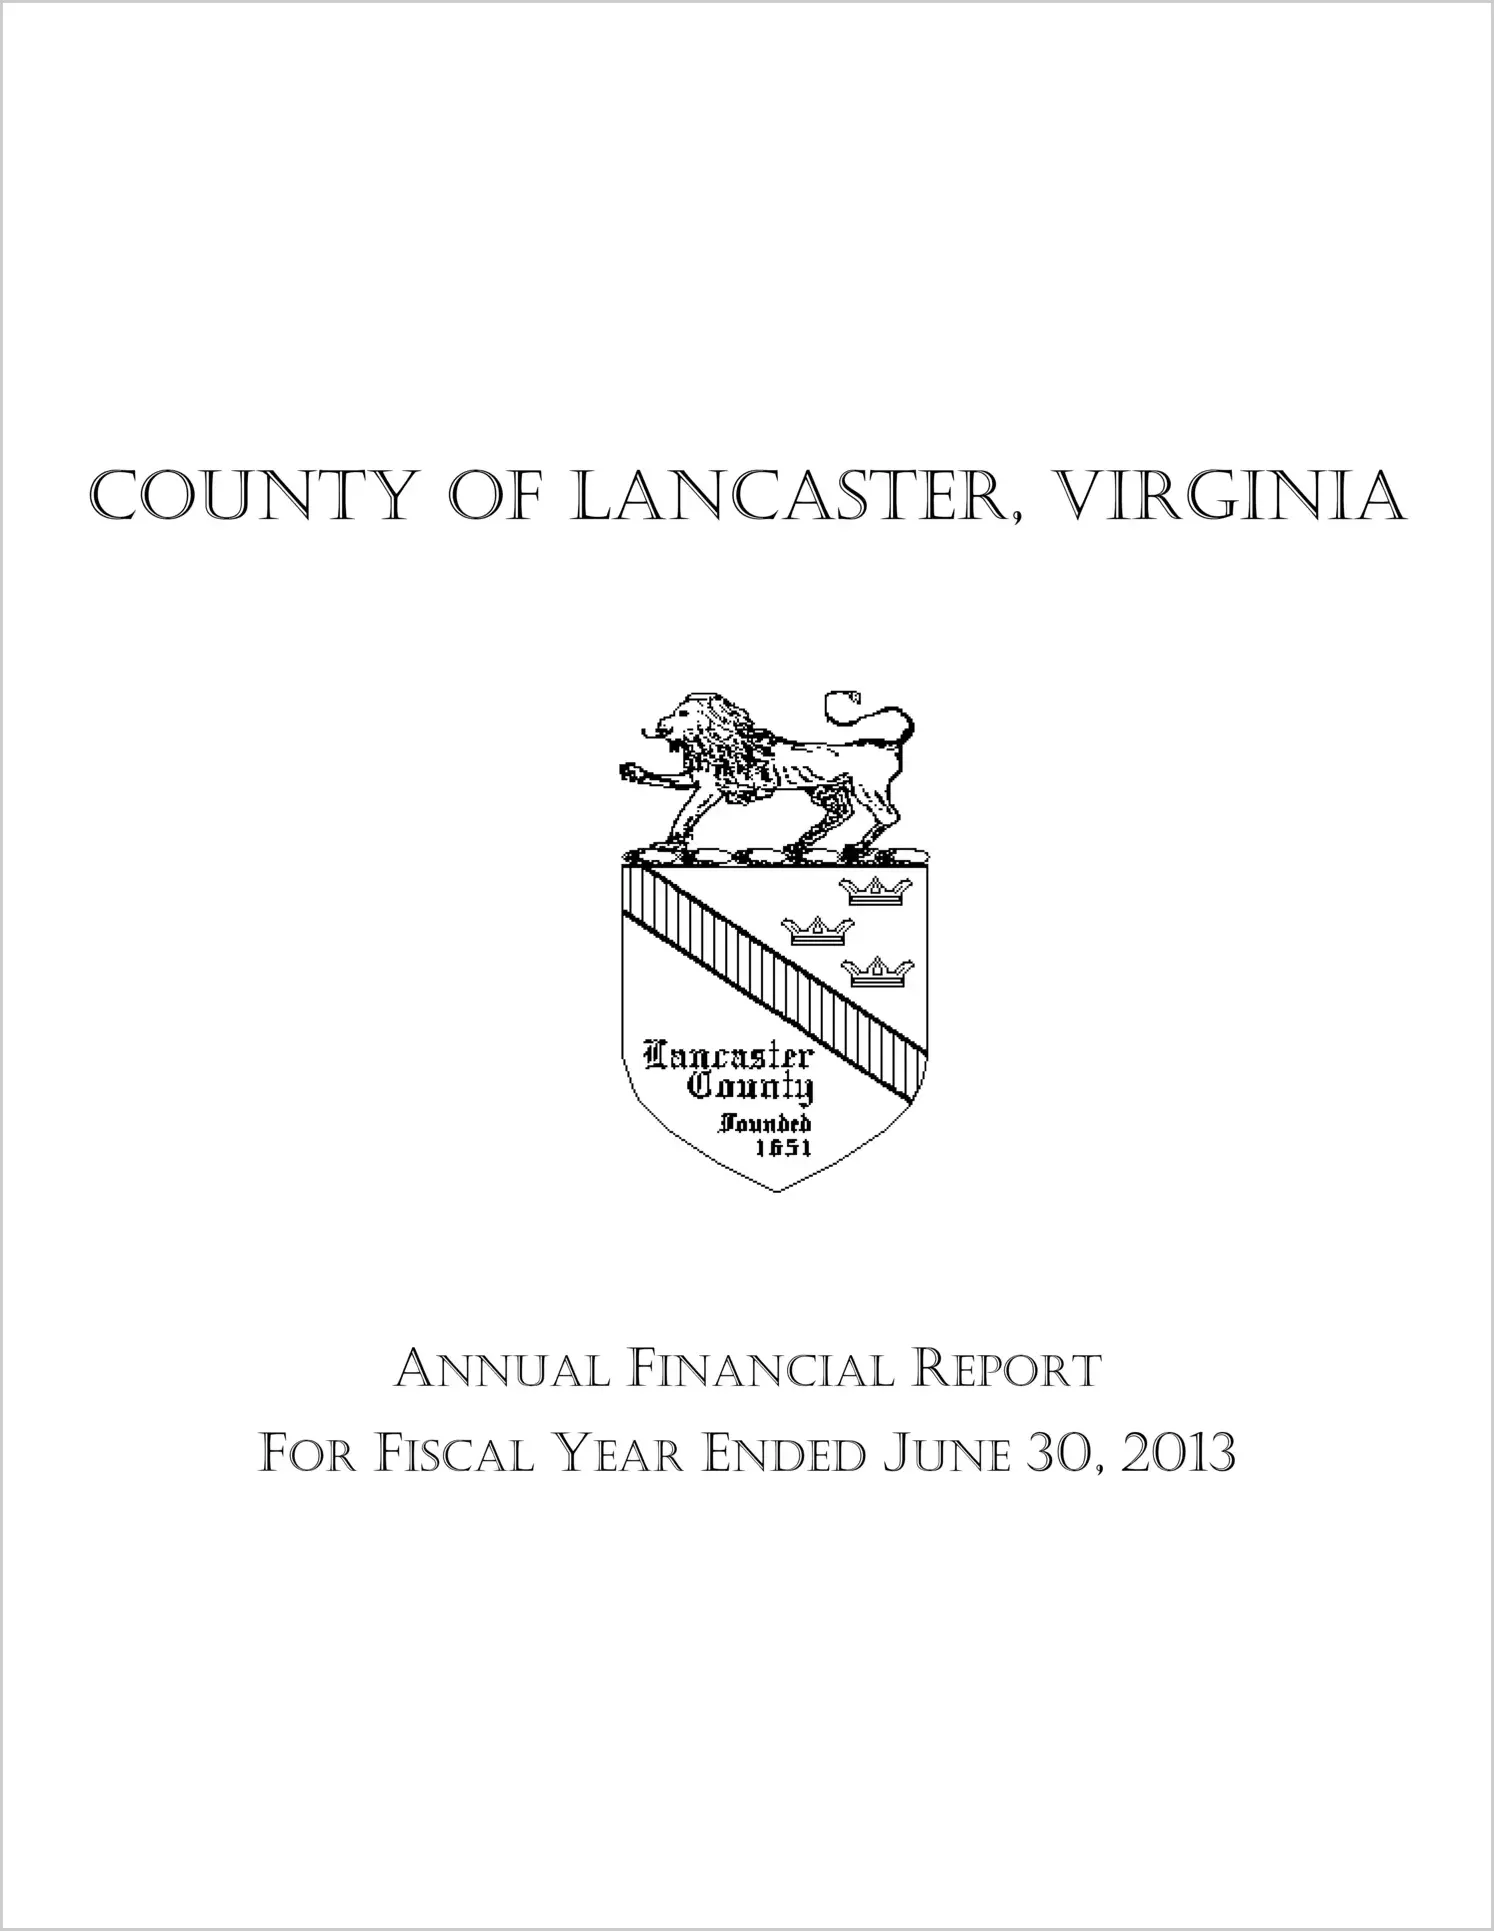 2013 Annual Financial Report for County of Lancaster